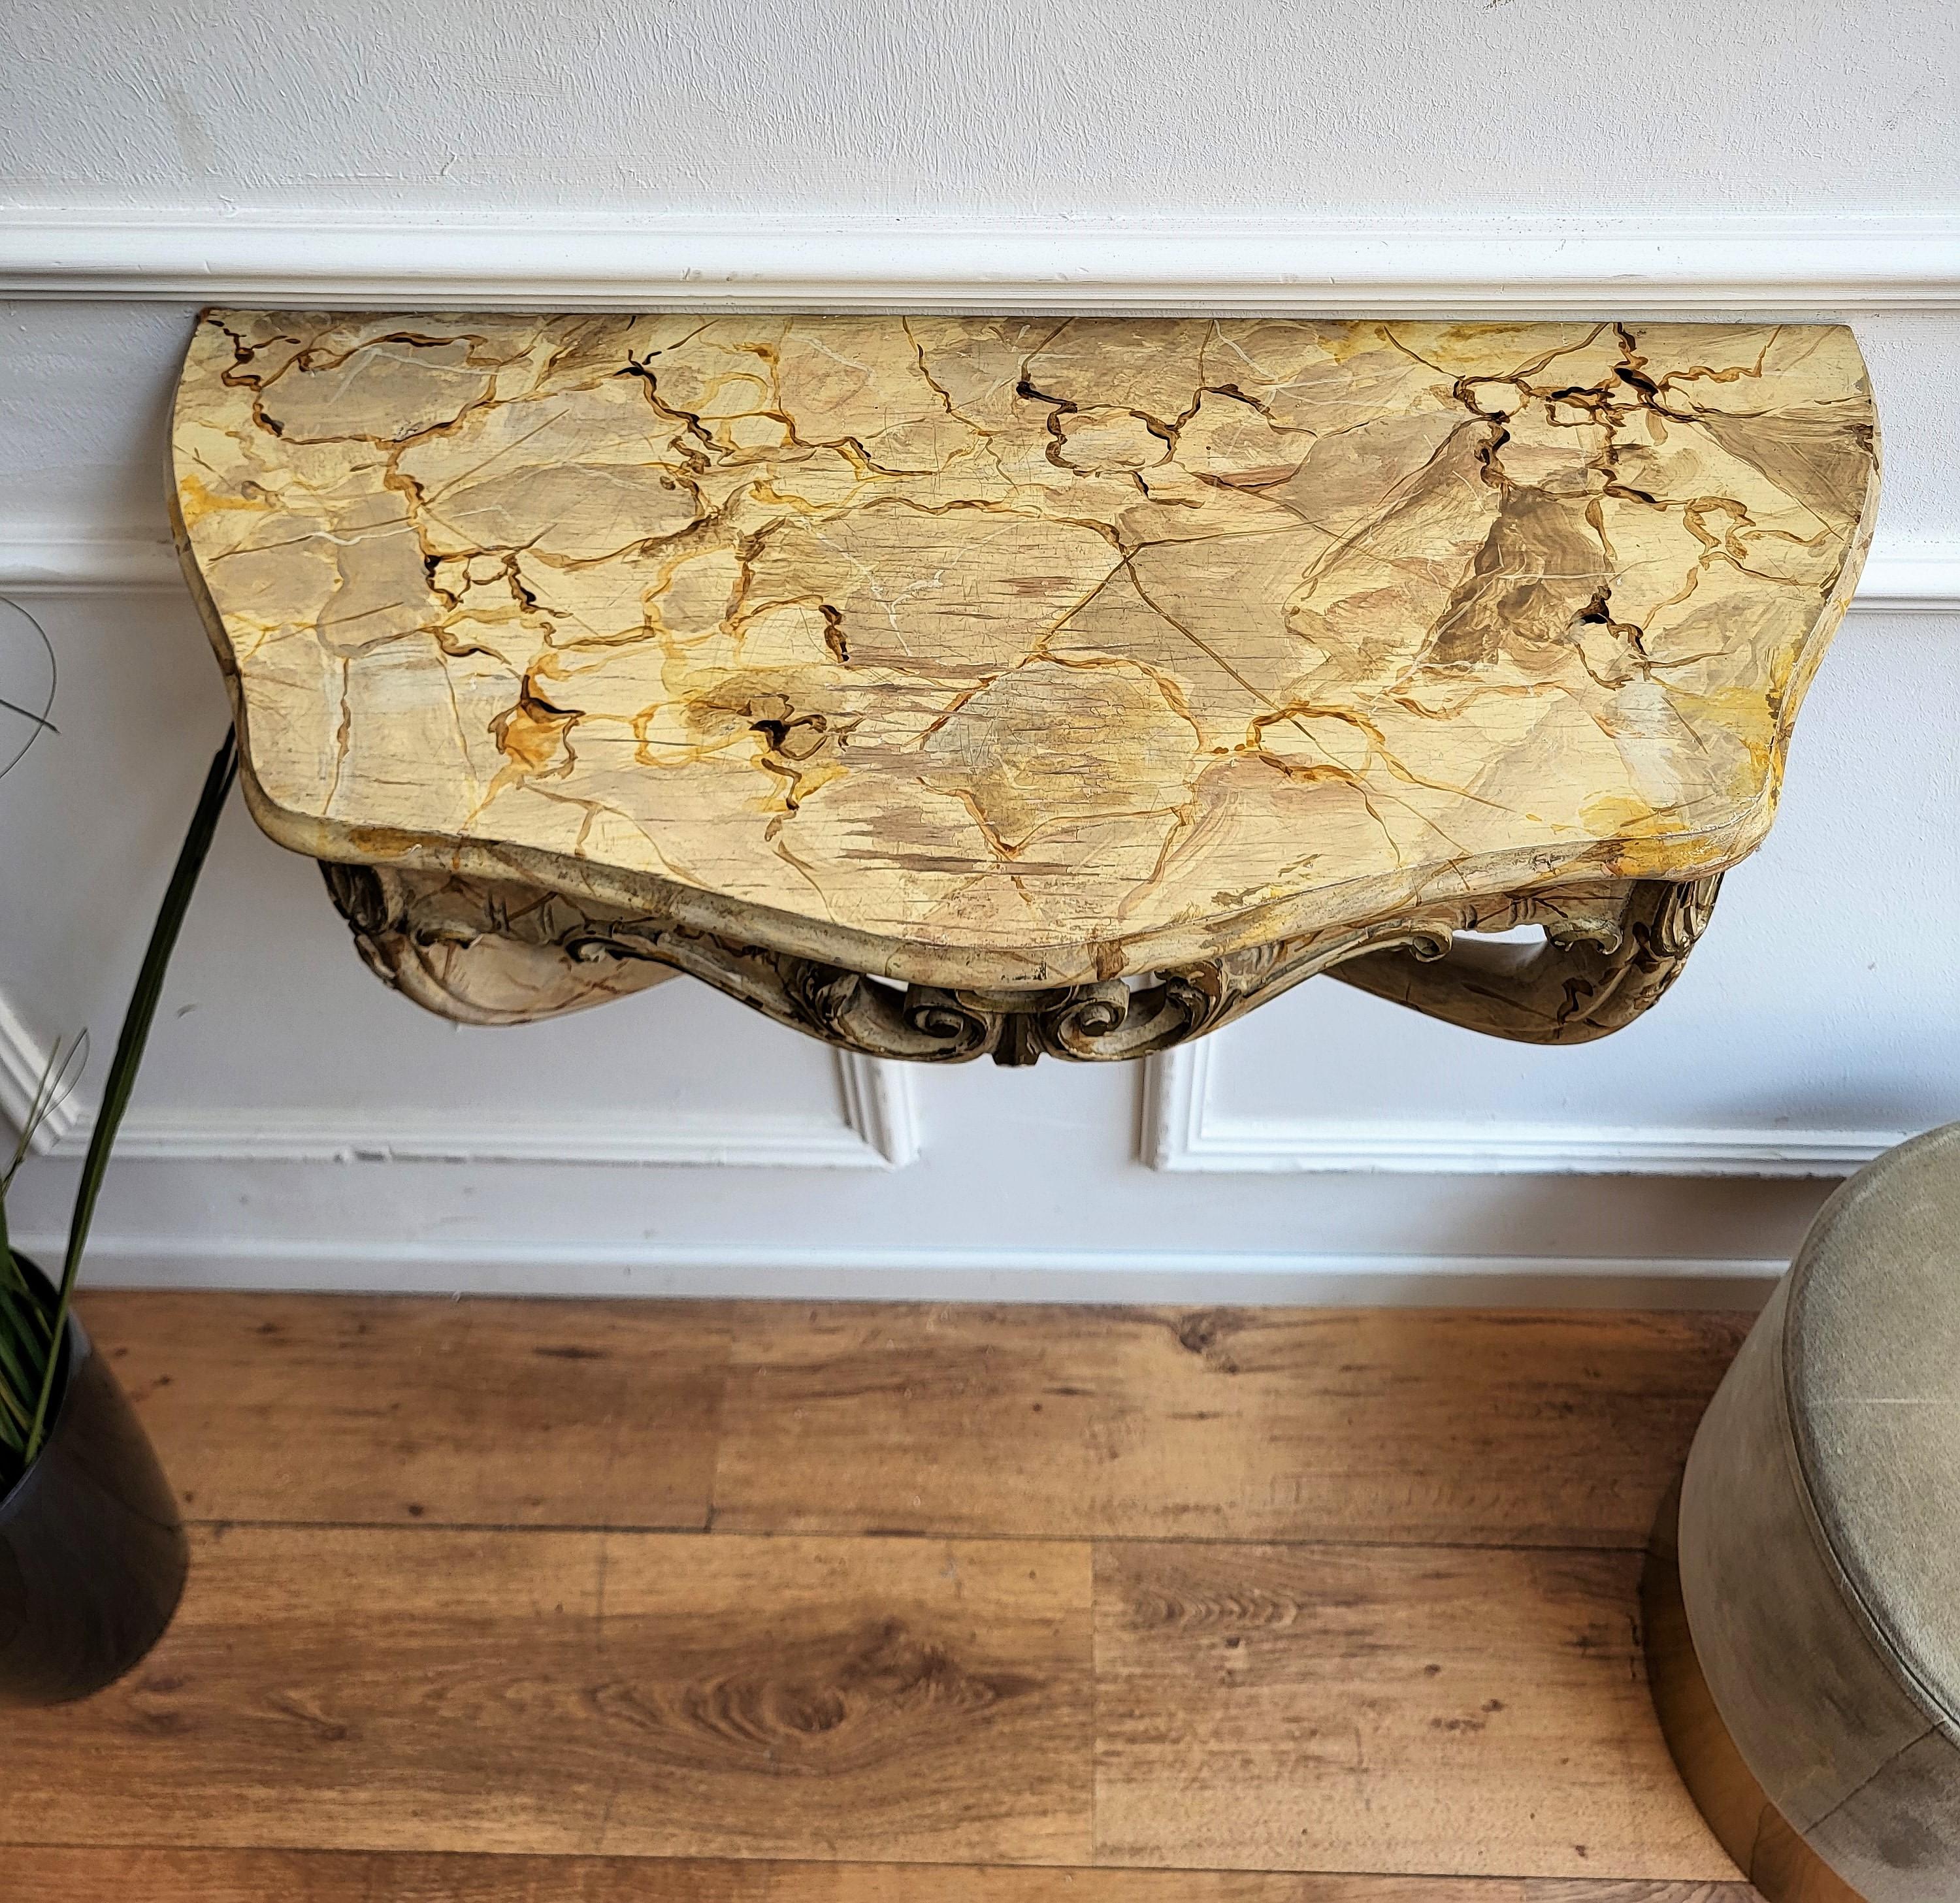 20th Century Italian Baroque Wooden Carved Painted Wall Mounted Console Table Shelf For Sale